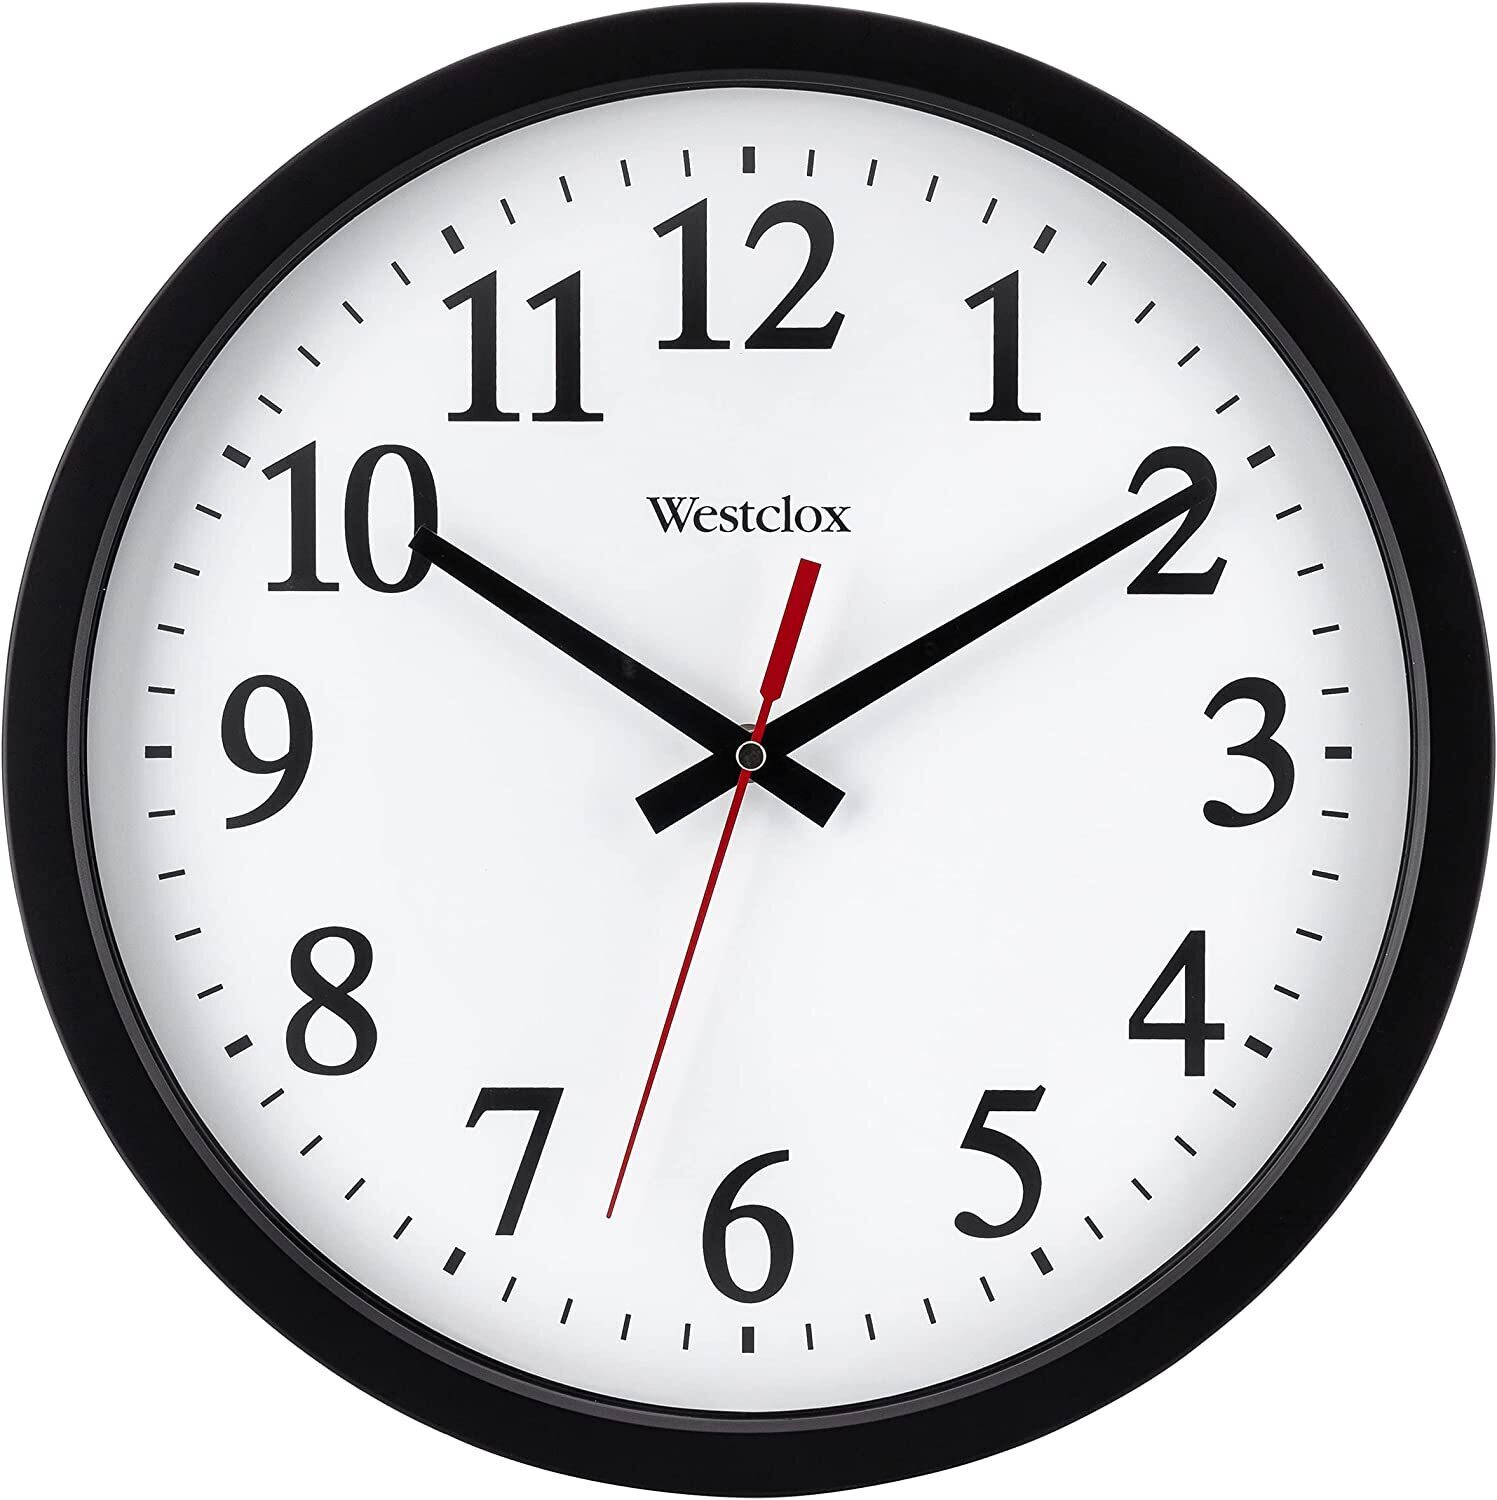 Classic Black and White Vintage Electric Analog Clock